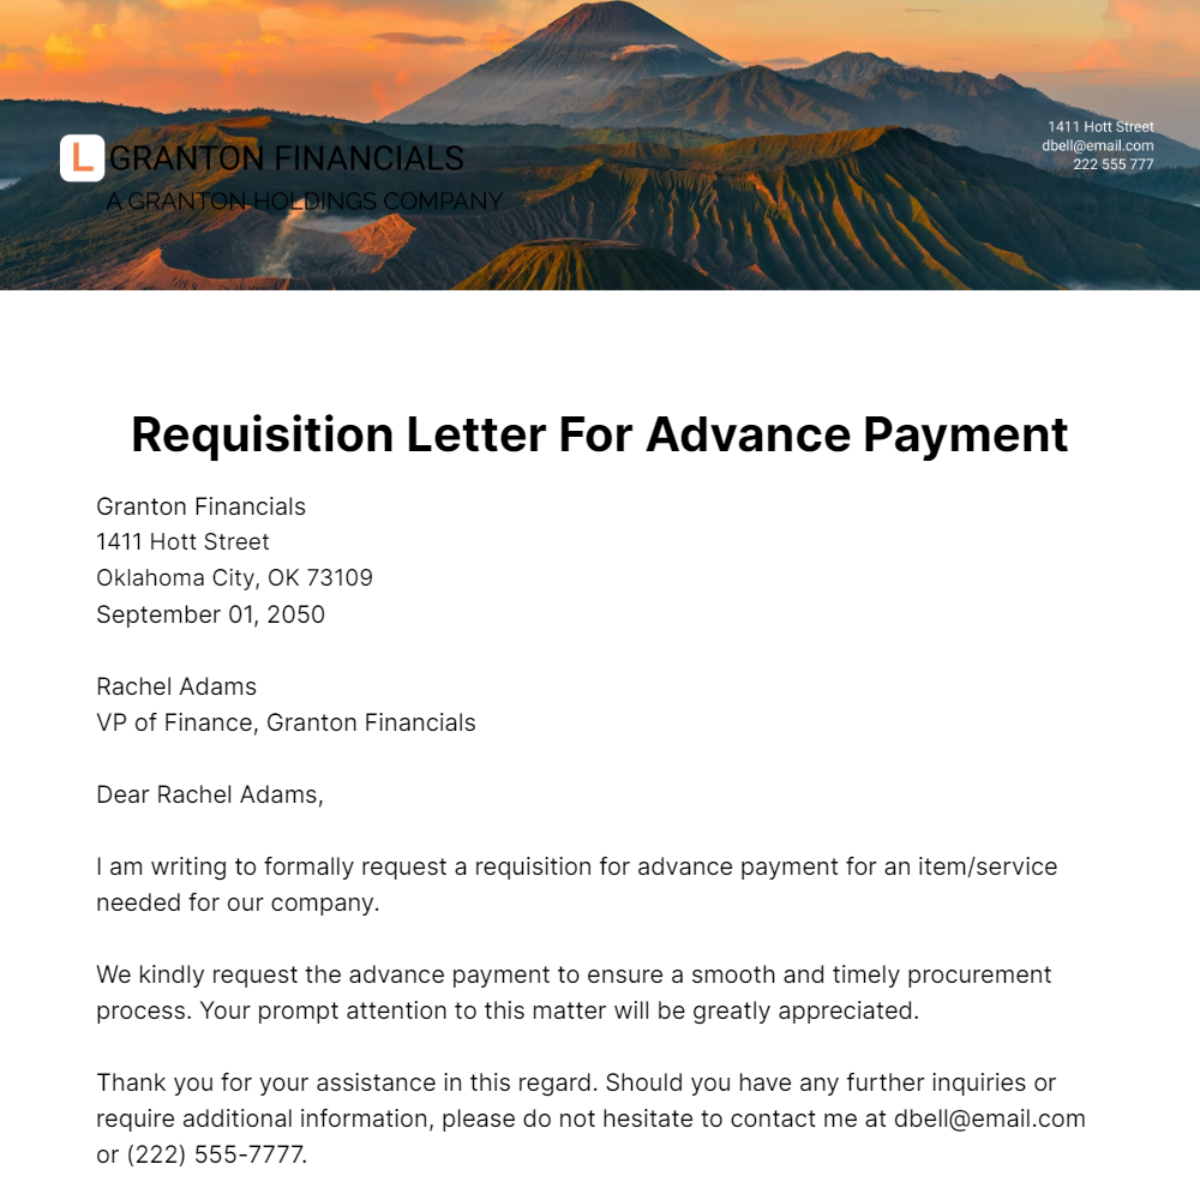 Requisition Letter for Advance Payment Template